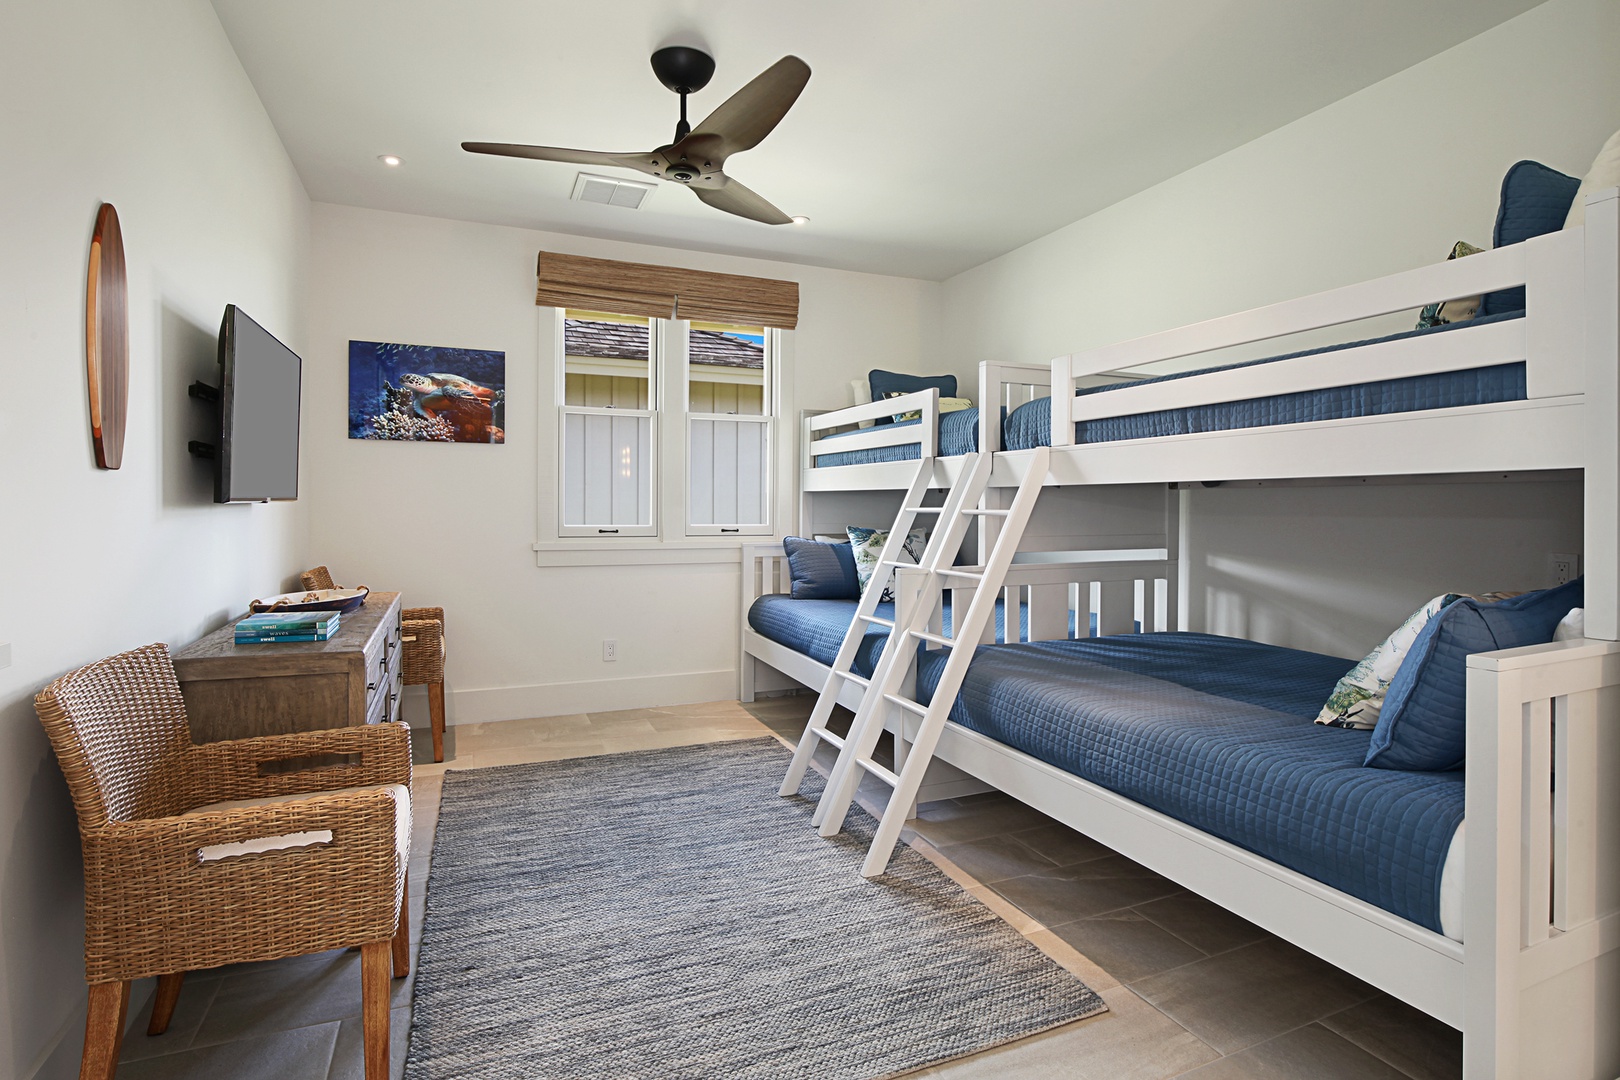 Koloa Vacation Rentals, OFB Hale Mala Ulu - Guest bunk room perfect for little ones. It has 2 Twin-over-Double Bunk Beds